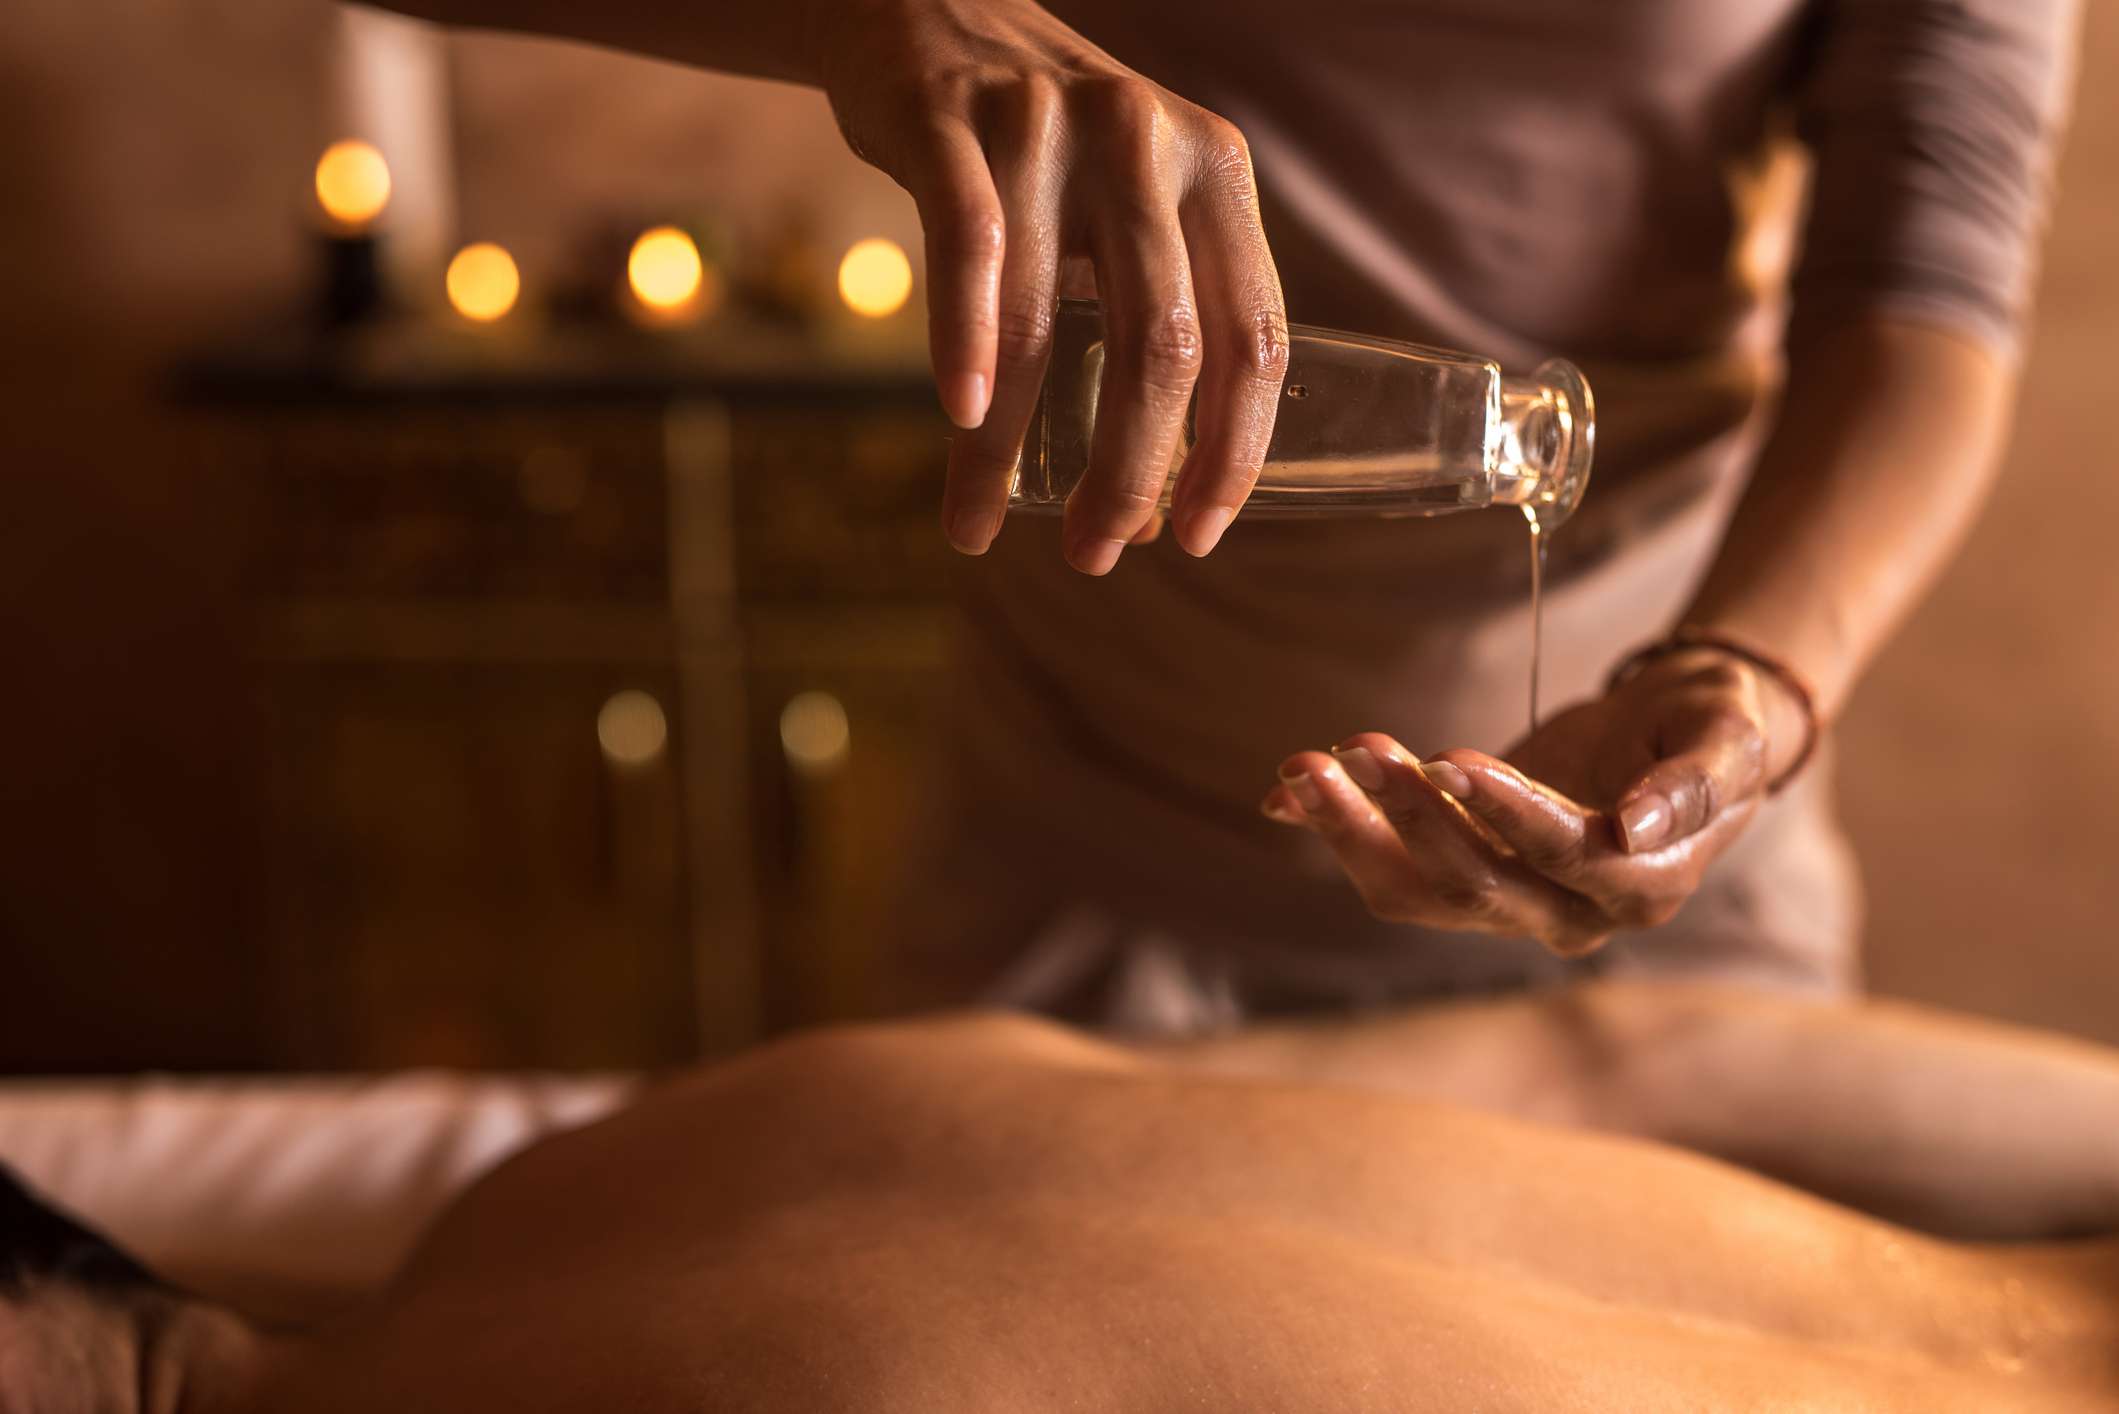 The Best Oils for a Relaxing and Nourishing Body Massage